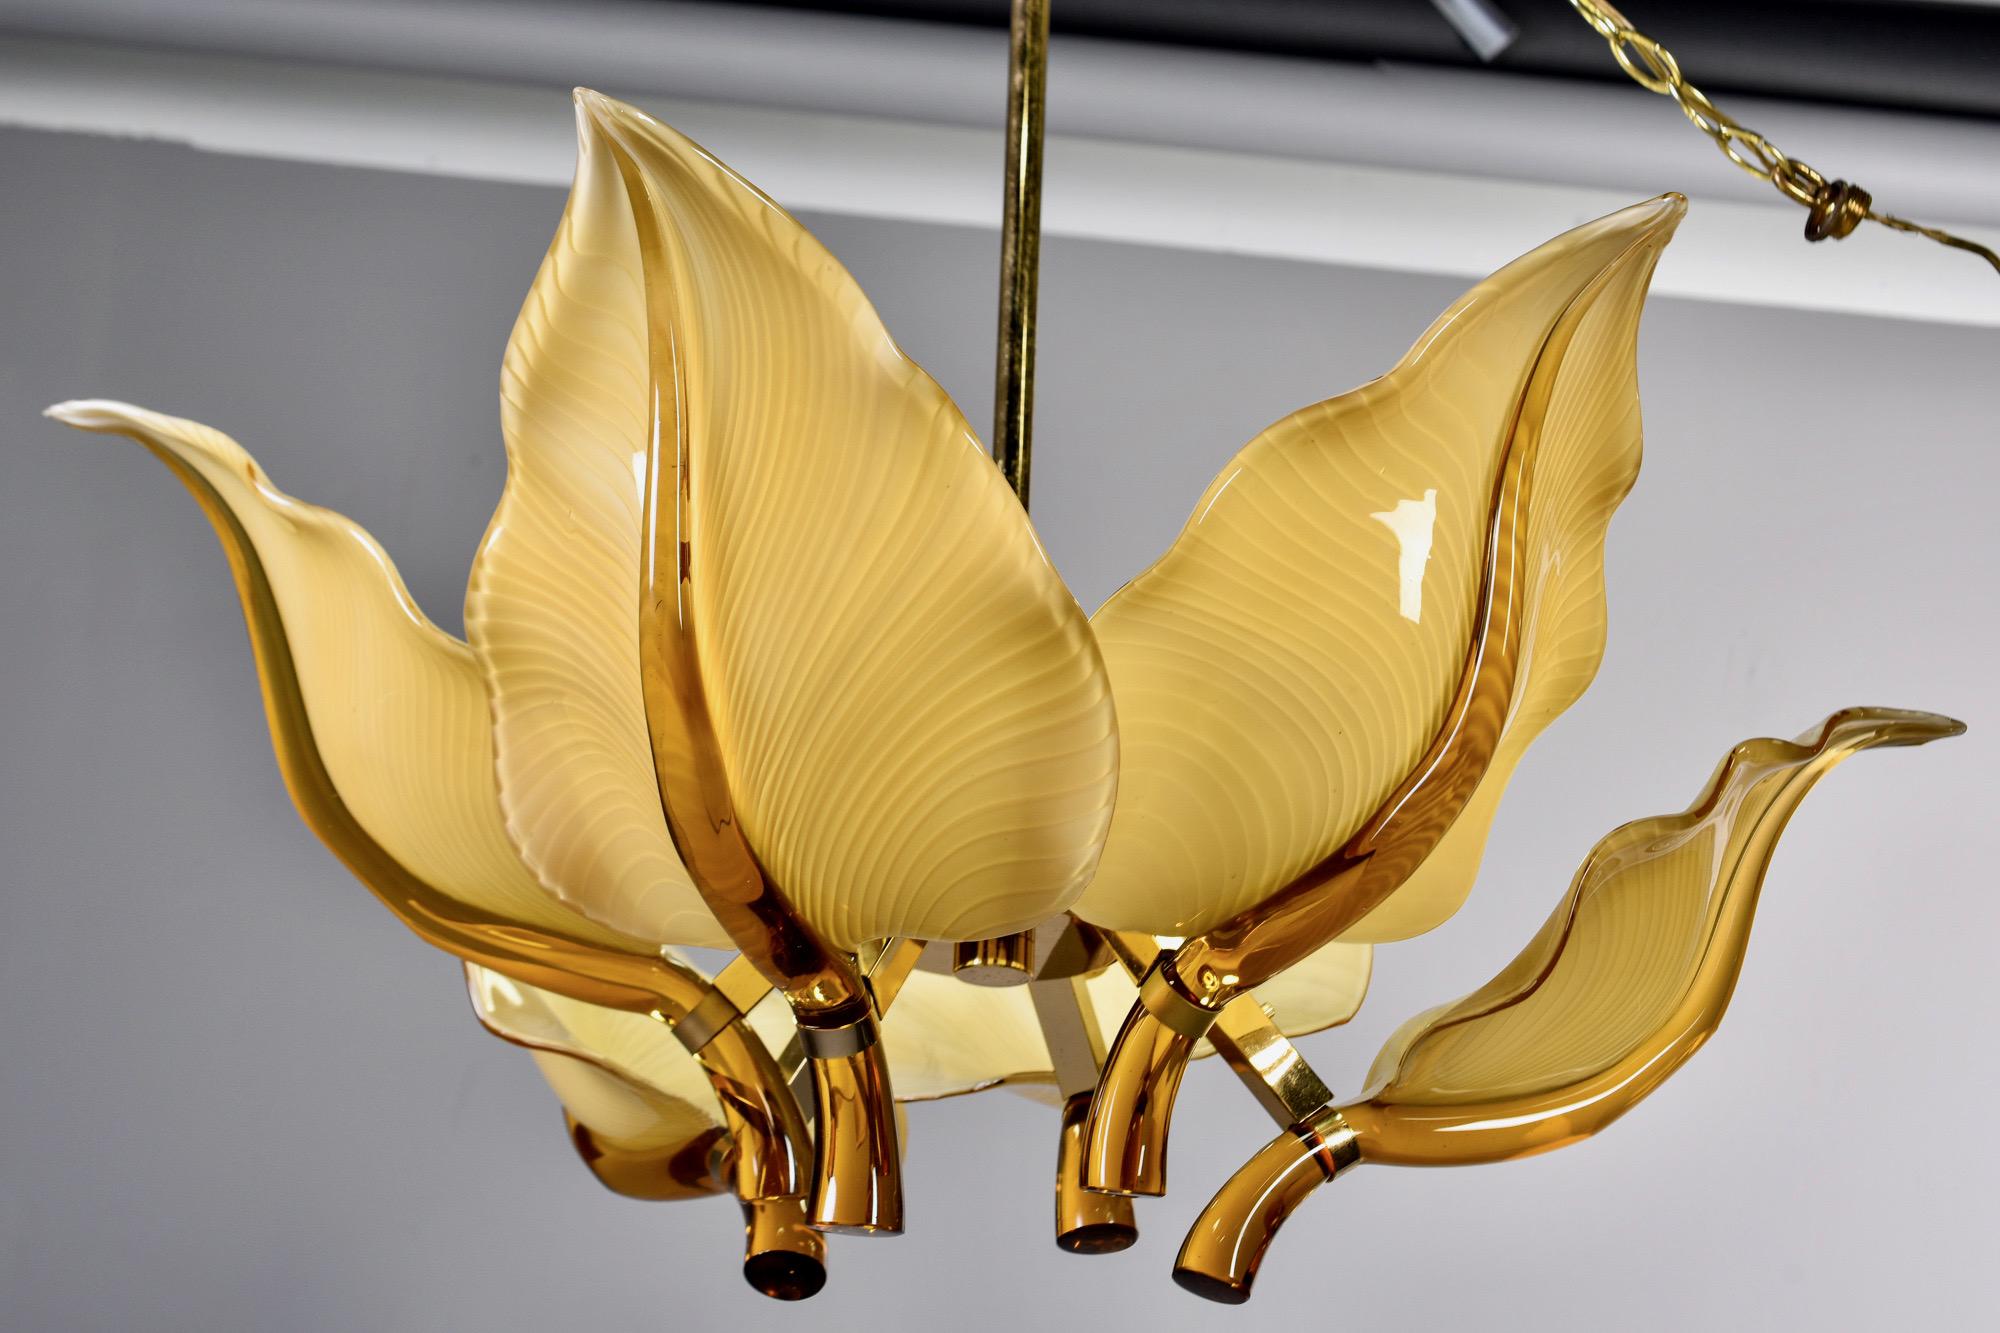 Murano glass fixture designed by Franco Luce for Seguso, circa 1970s. Polished brass frame supports six amber colored mouth blown glass leaves. Fixture has six standard sized sockets. 

Measurement above is from bottom of fixture to top of the